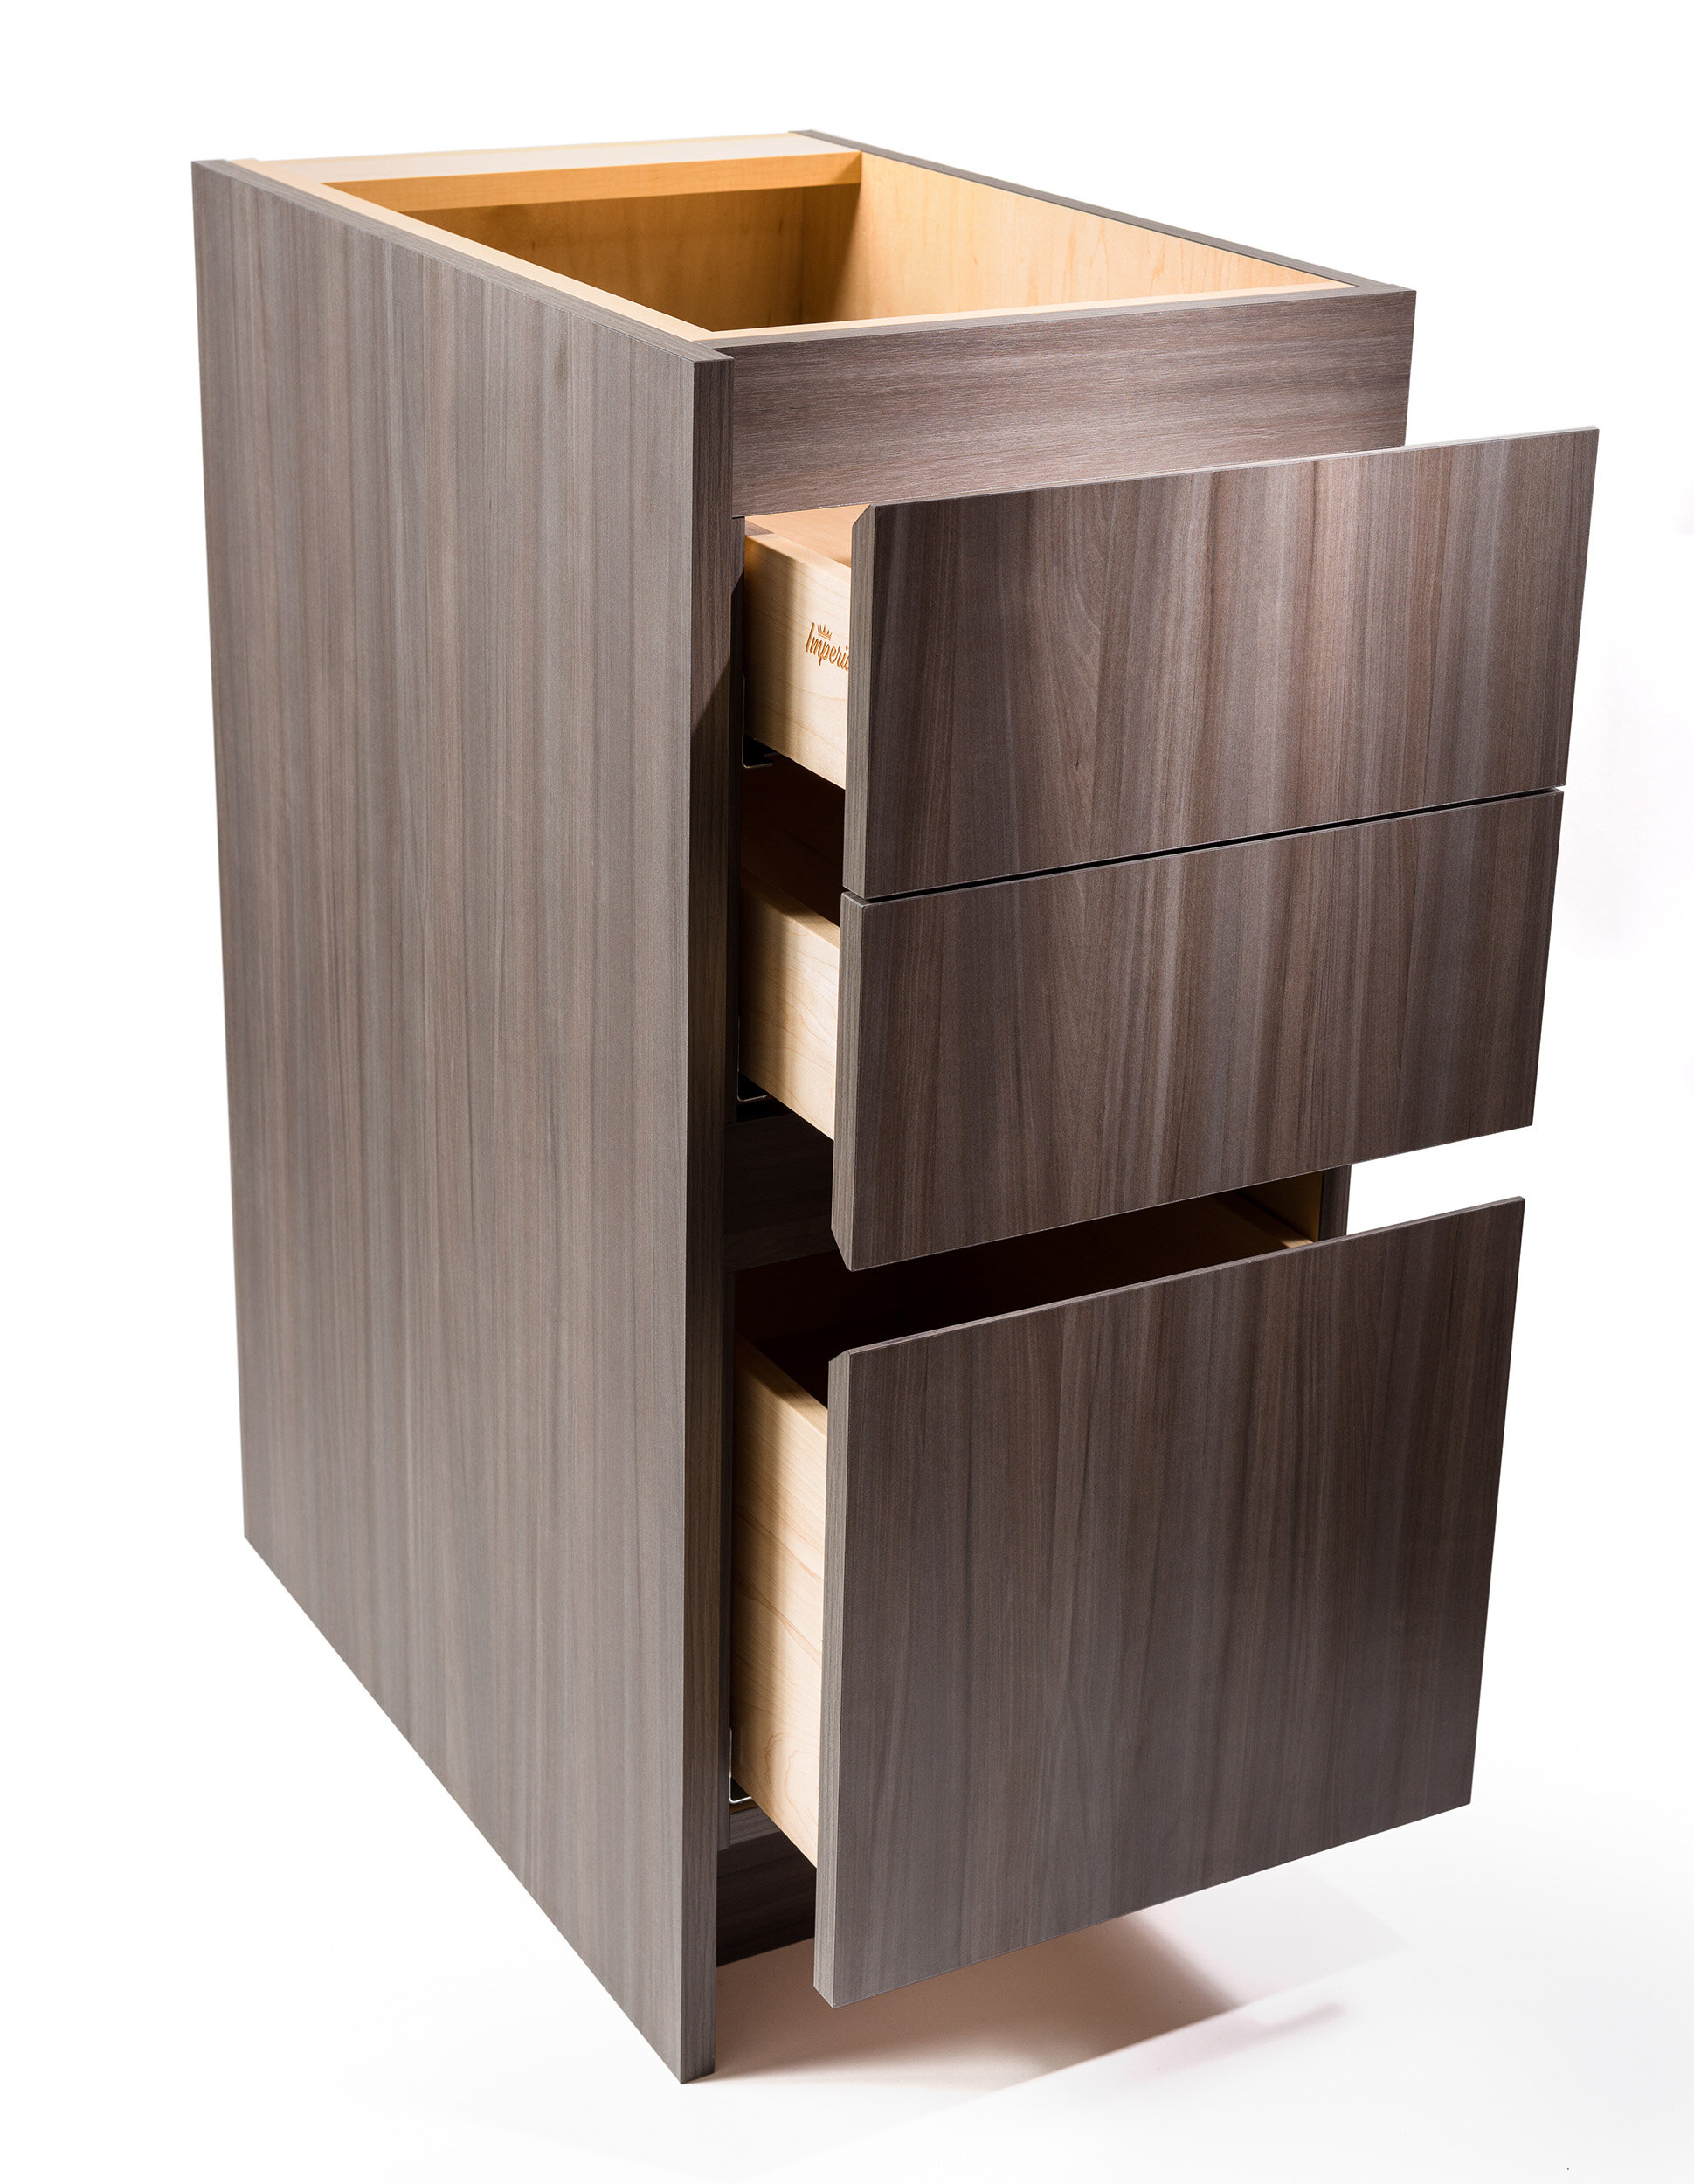 darmouth-spec-cabinet-drawers-open.jpg